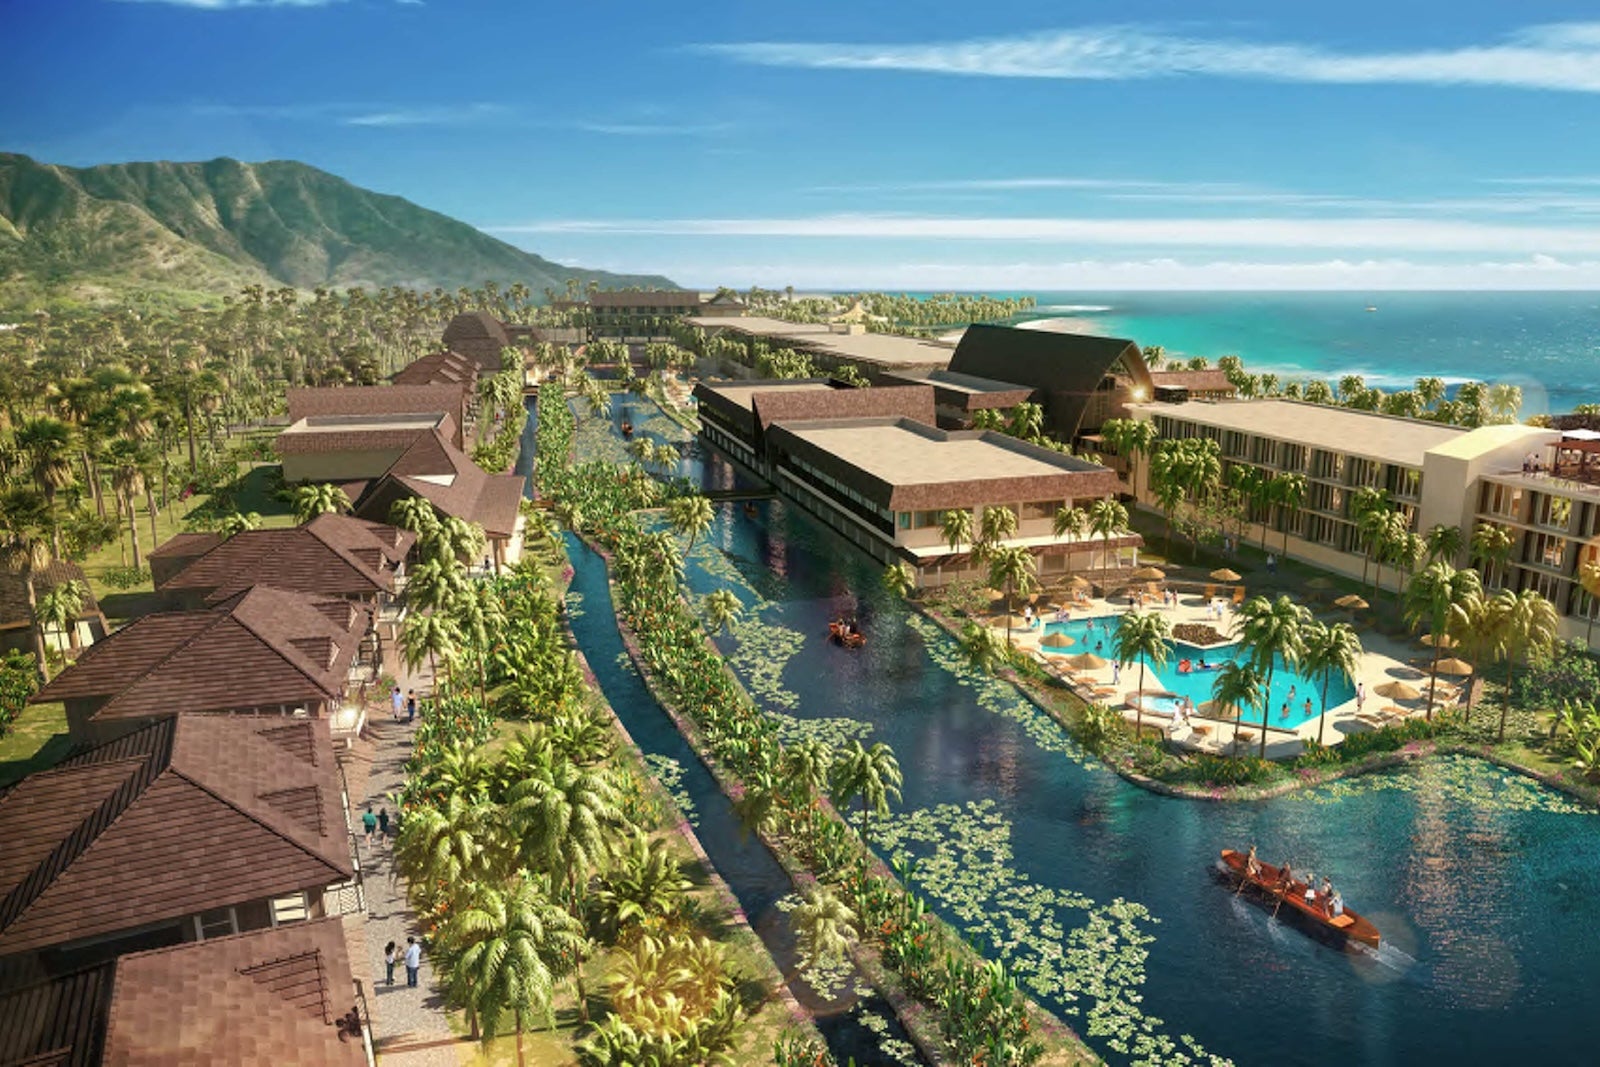 Kimpton is taking over a historic resort in Hawaii – The Points Guy